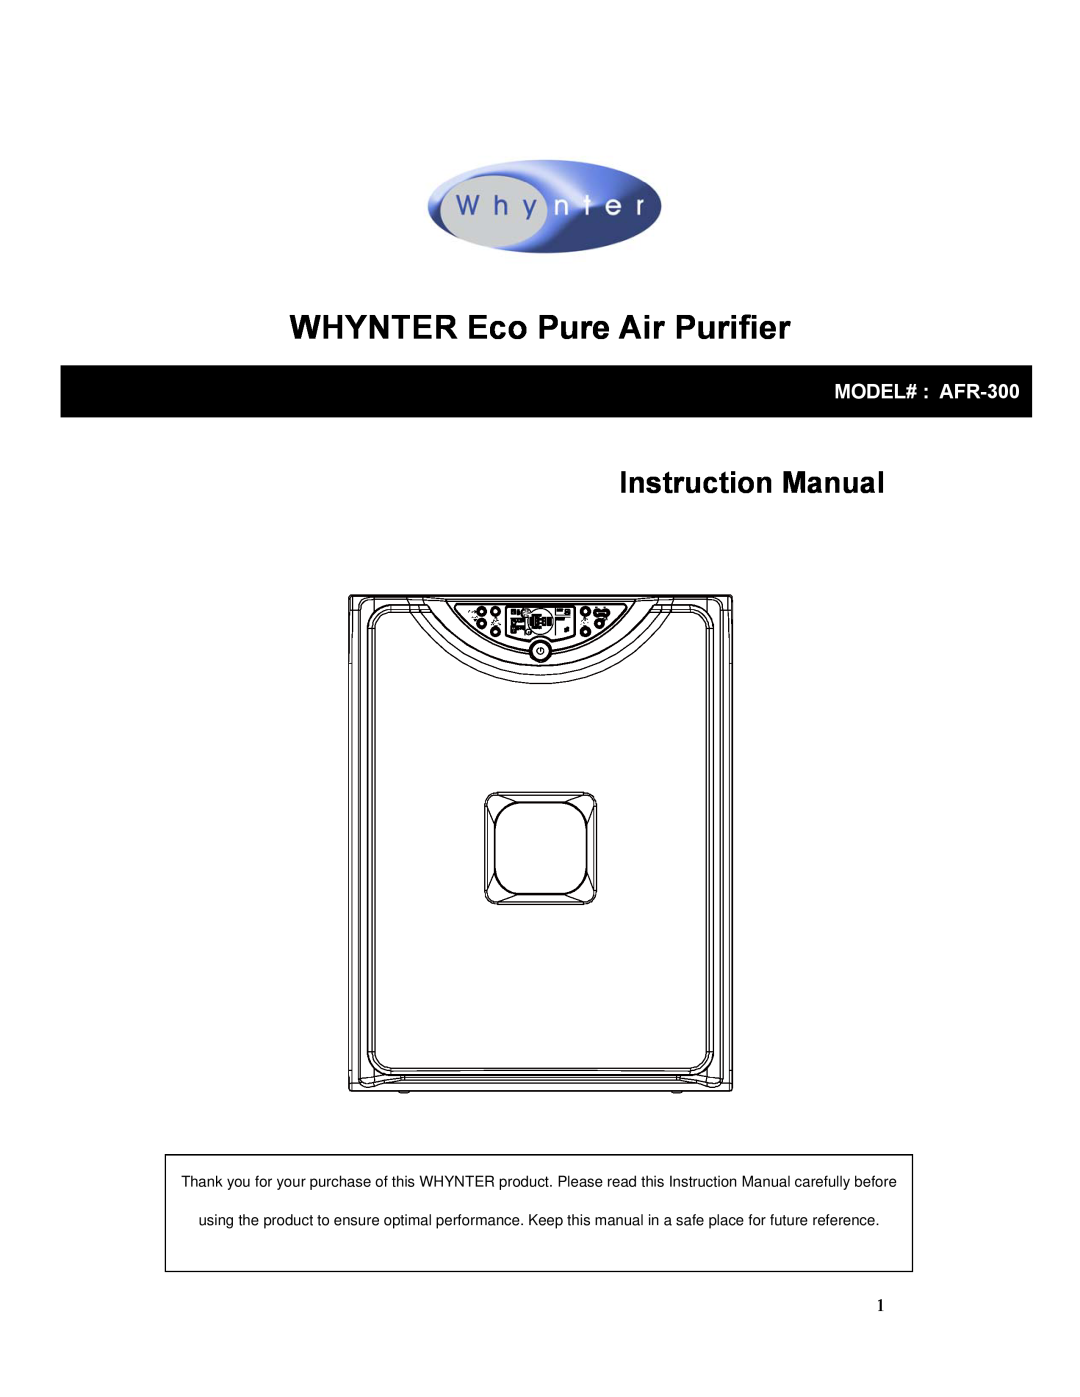 Whynter instruction manual WHYNTER Eco Pure Air Purifier, MODEL# AFR-300 